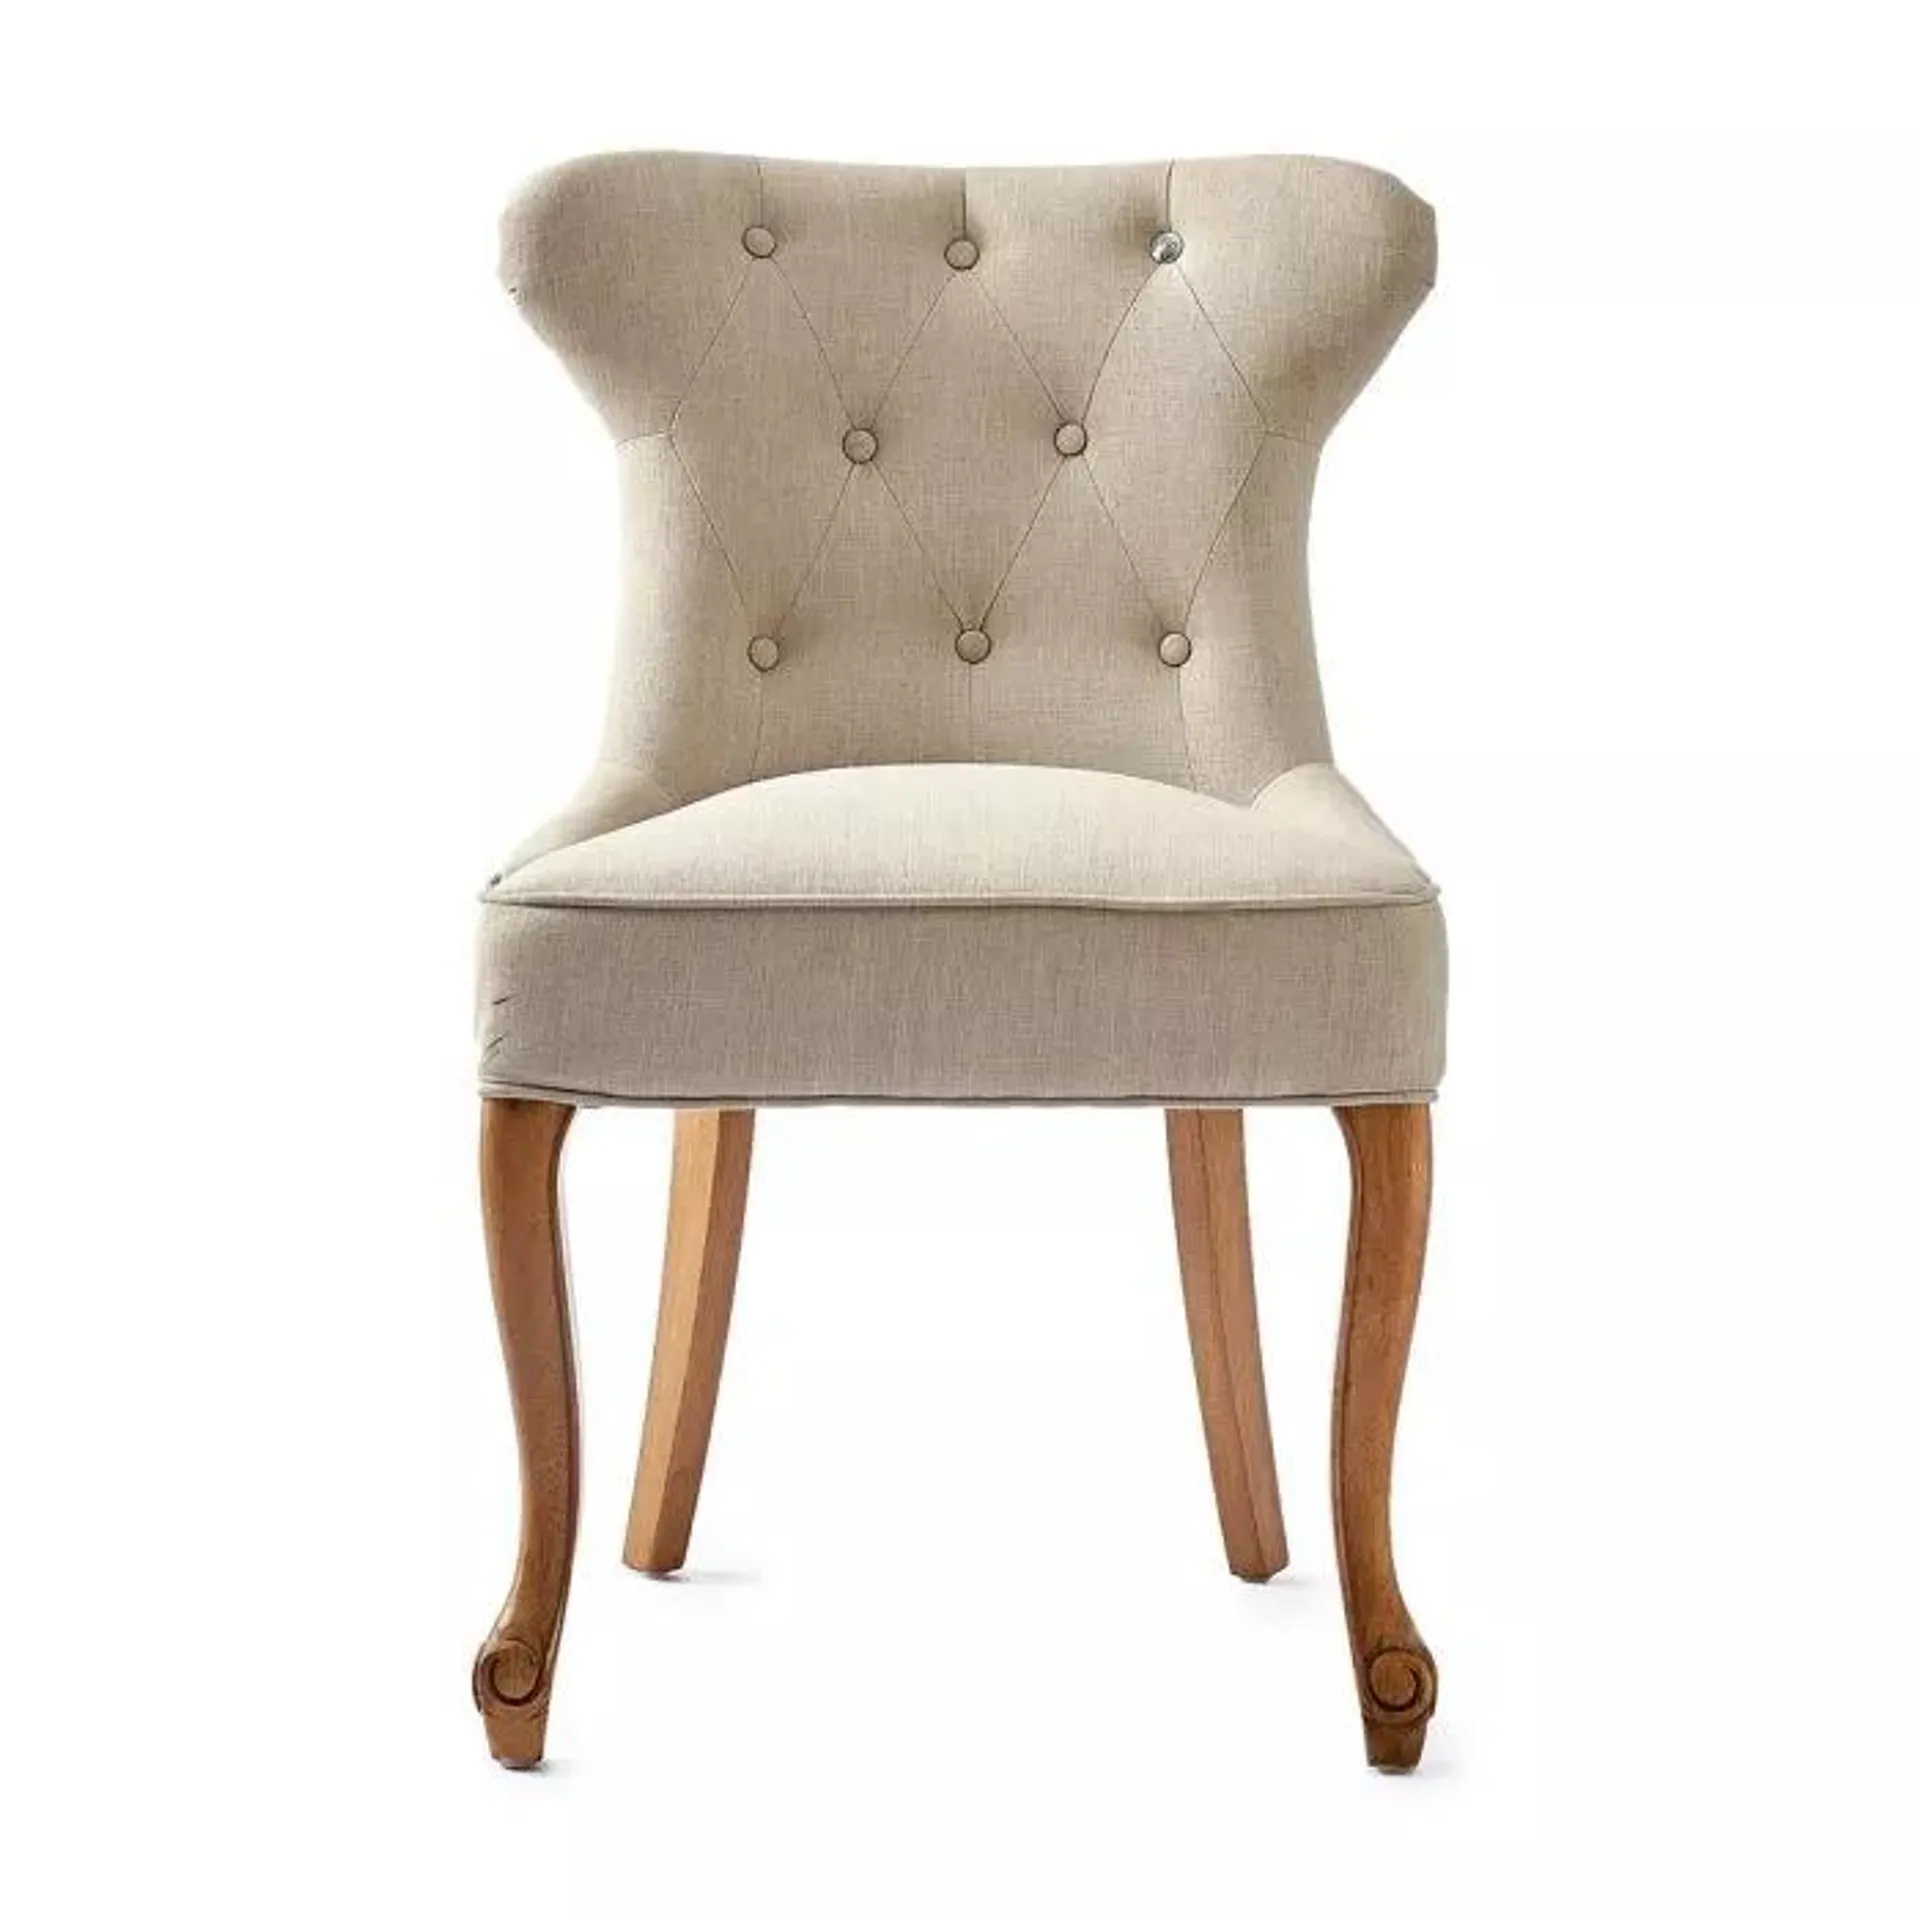 Dining Chair George, Flax, Linen